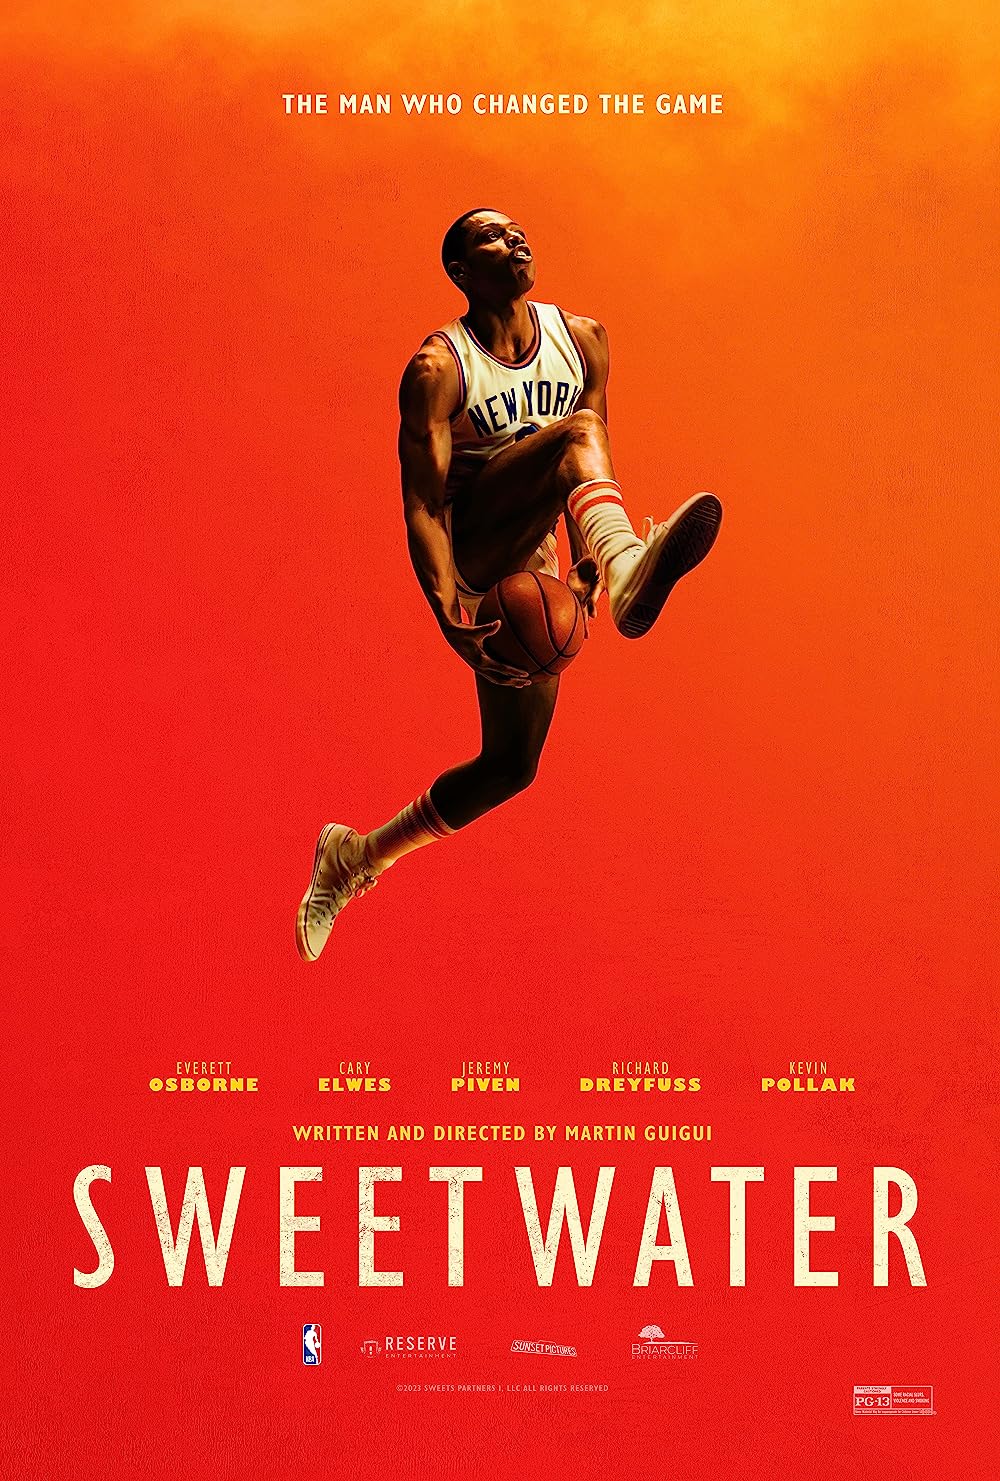 Cover Art for "Sweetwater"